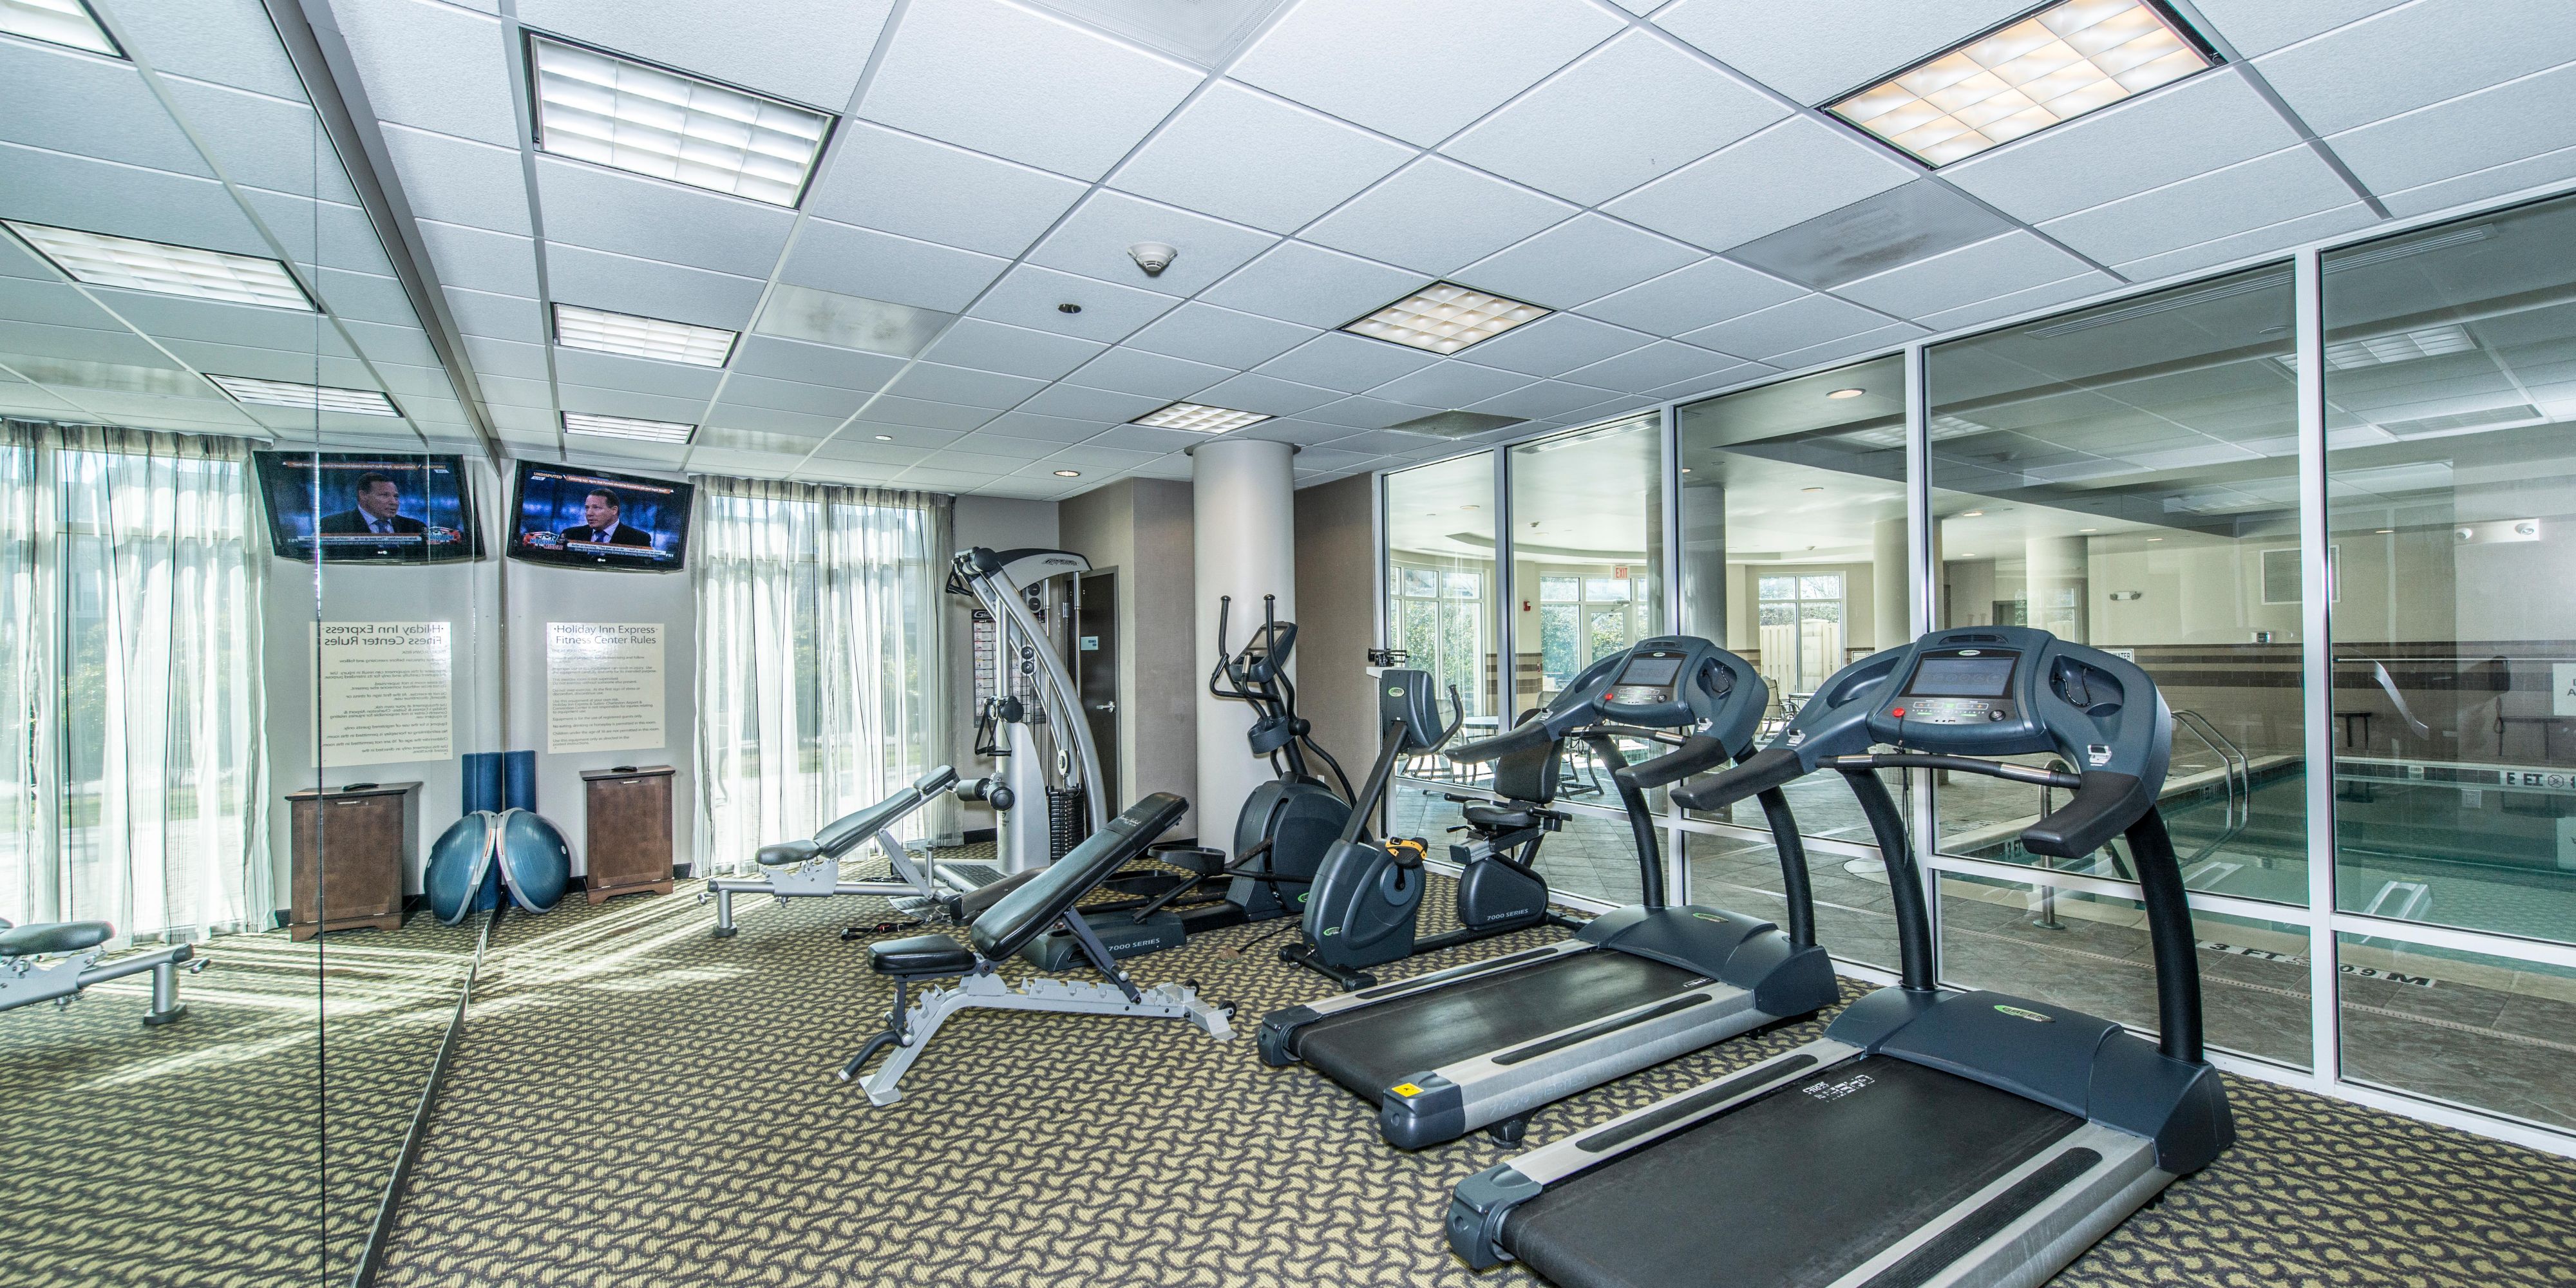 Our on-site fitness center is open 24 hours a day to guests of the hotel. State of the art cardio equipment and free weights allow you to get your workout in while away from home. Must be 18 years of age to use or have a parent or legal guardian present. 